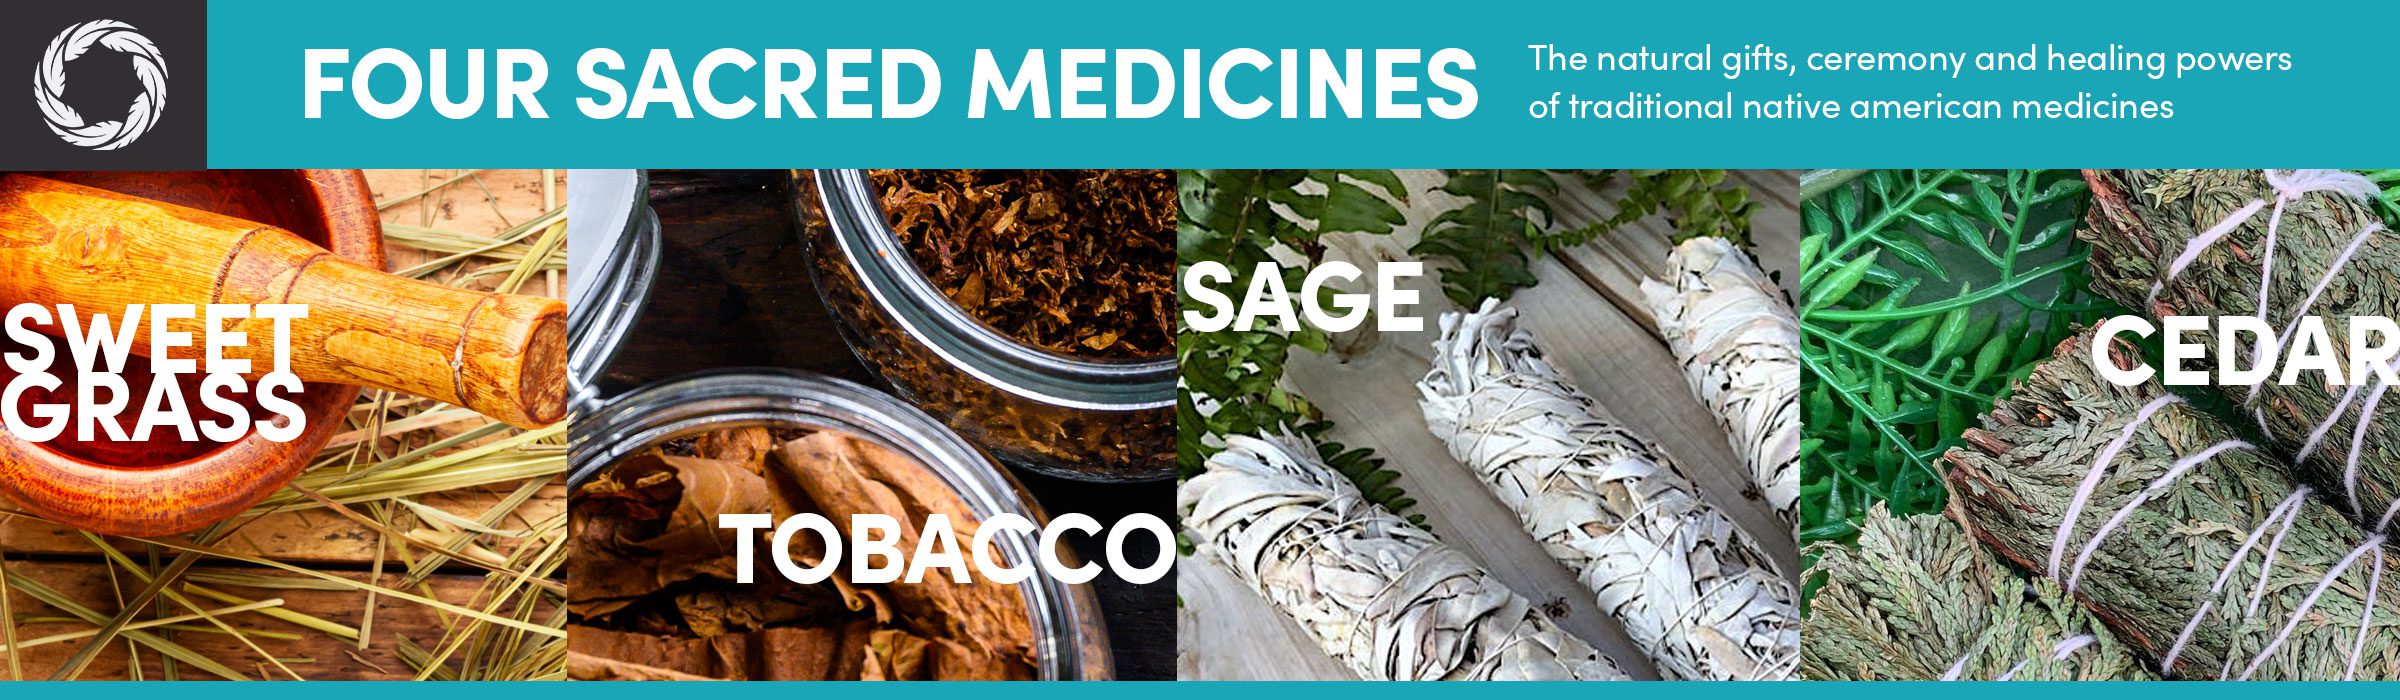 Four Sacred Medicines American Indian Health Service Of Chicago Inc